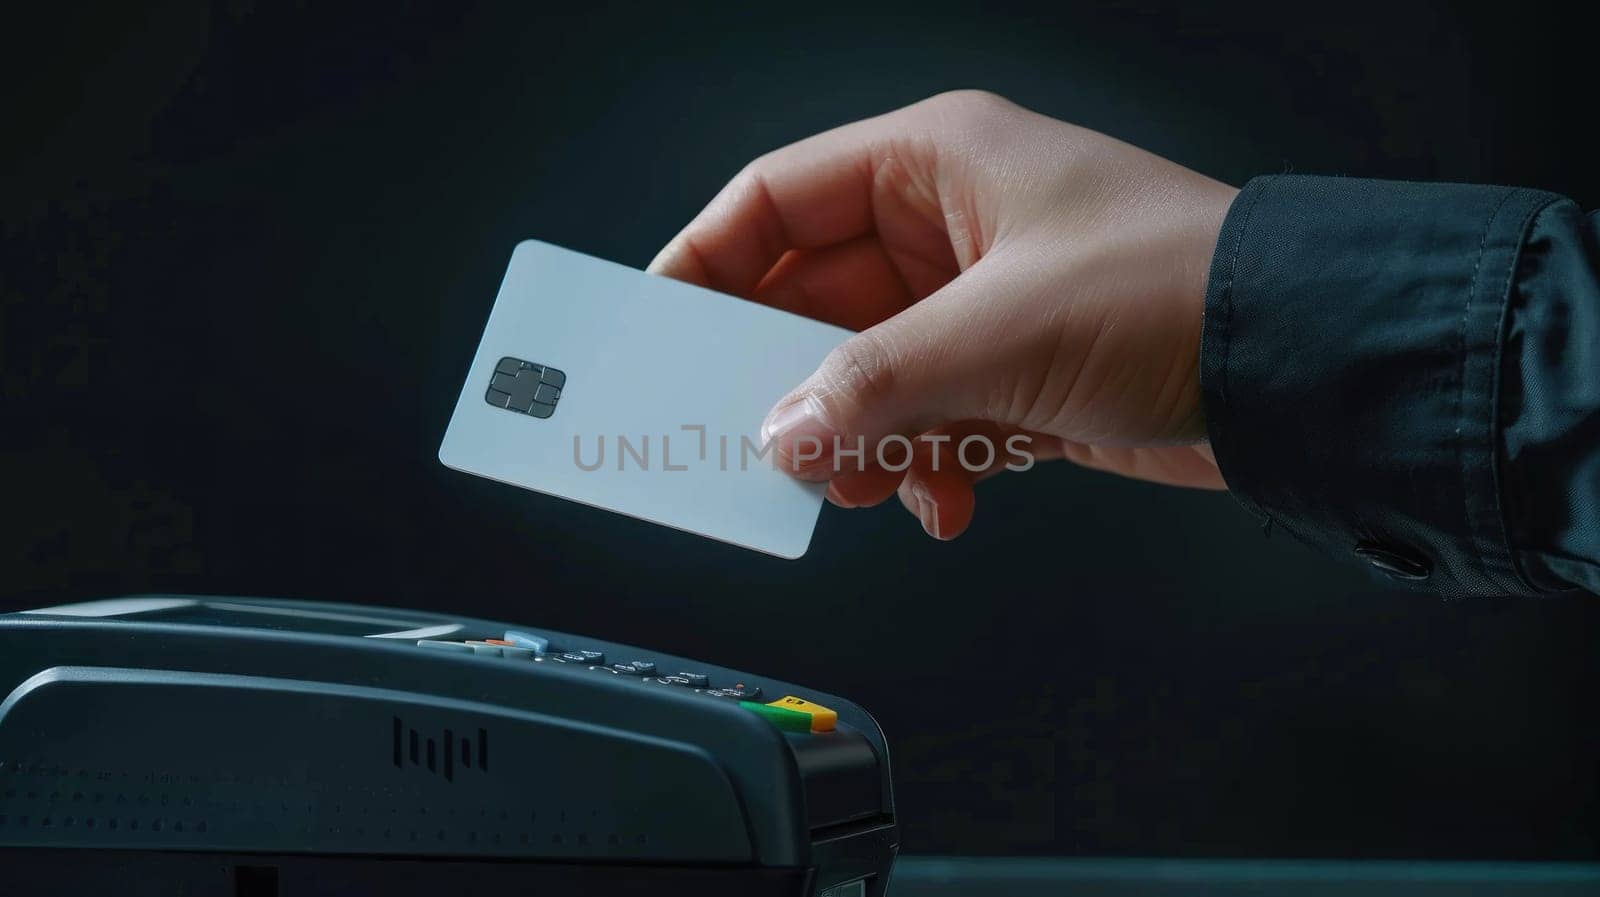 A Hand inserting credit card into payment terminal.